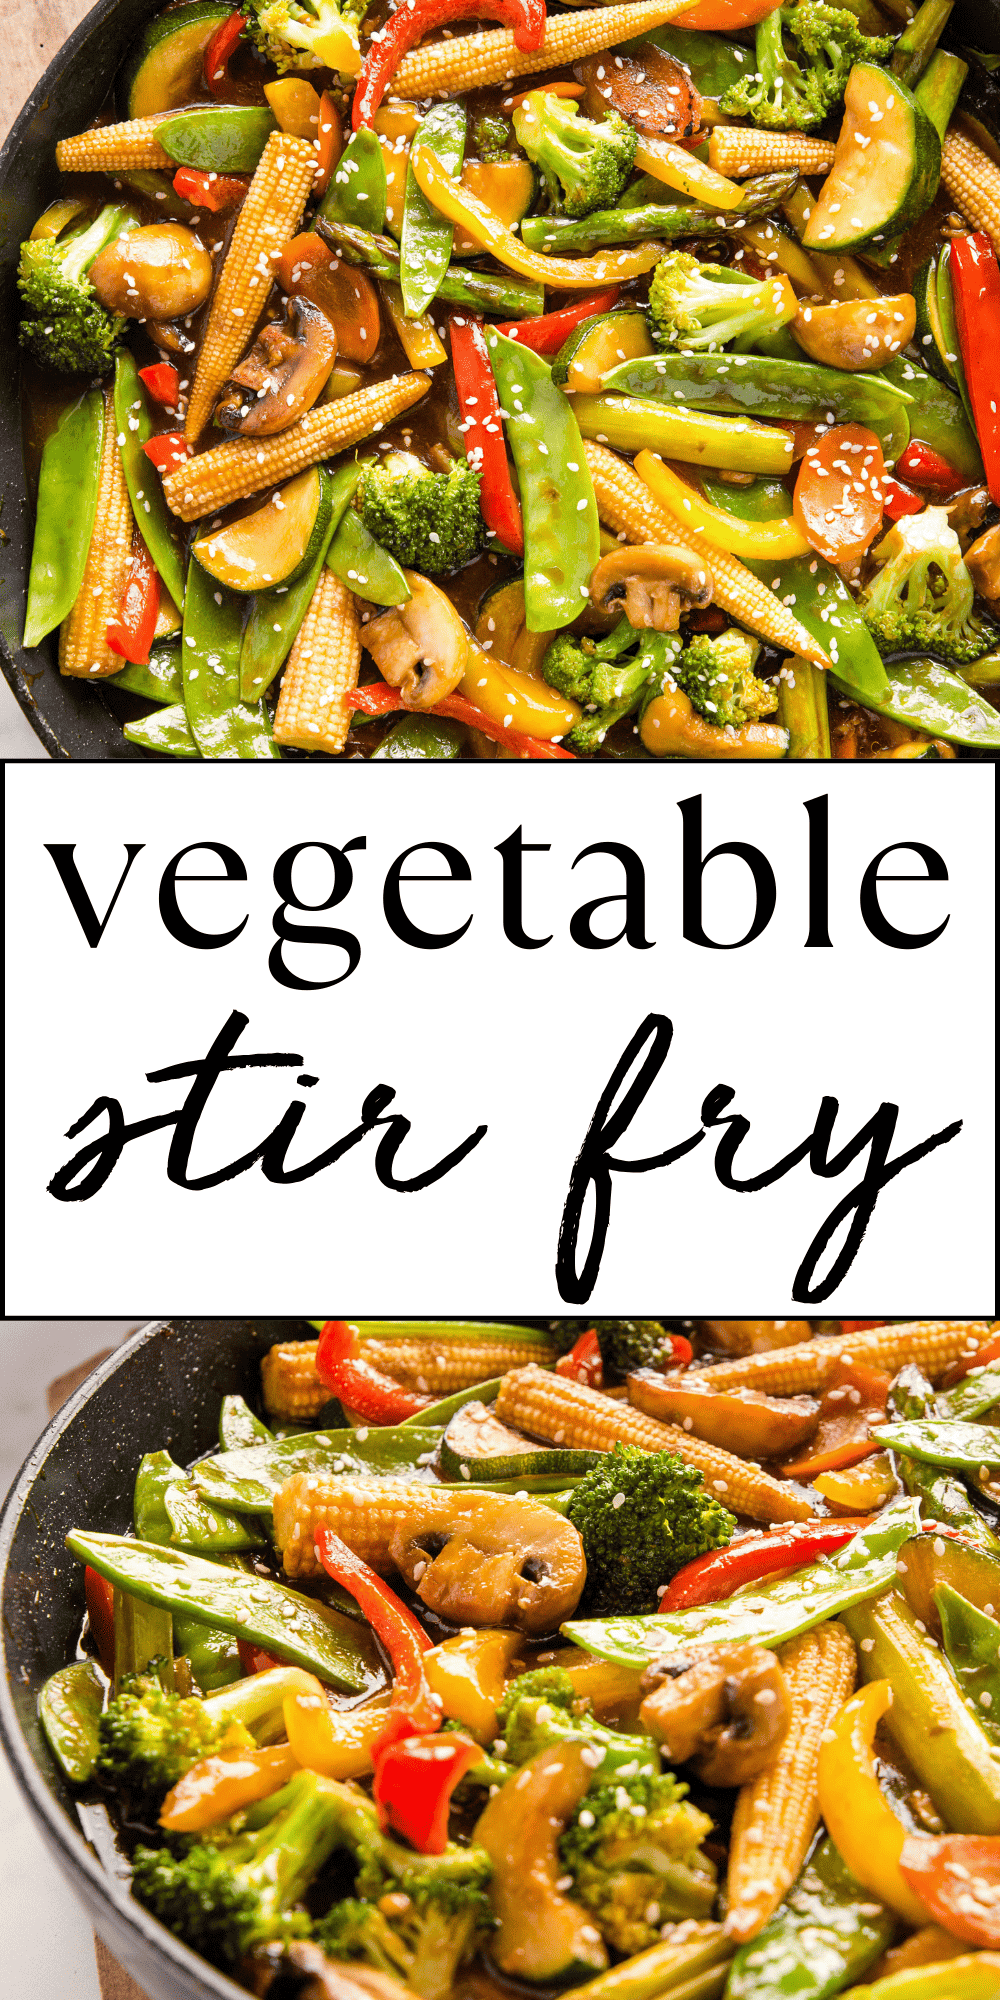 This Vegetable Stir Fry recipe is made with a blend of colourful vegetables and a sweet and savoury stir fry sauce. Easy, healthy stir fry vegetables made in one pan in 25 minutes or less! Recipe from thebusybaker.ca! #vegetablestirfry #stirfryvegetables #vegetablestirfryrecipe #easystirfry #stirfrysauce #easymeal #vegetarian via @busybakerblog